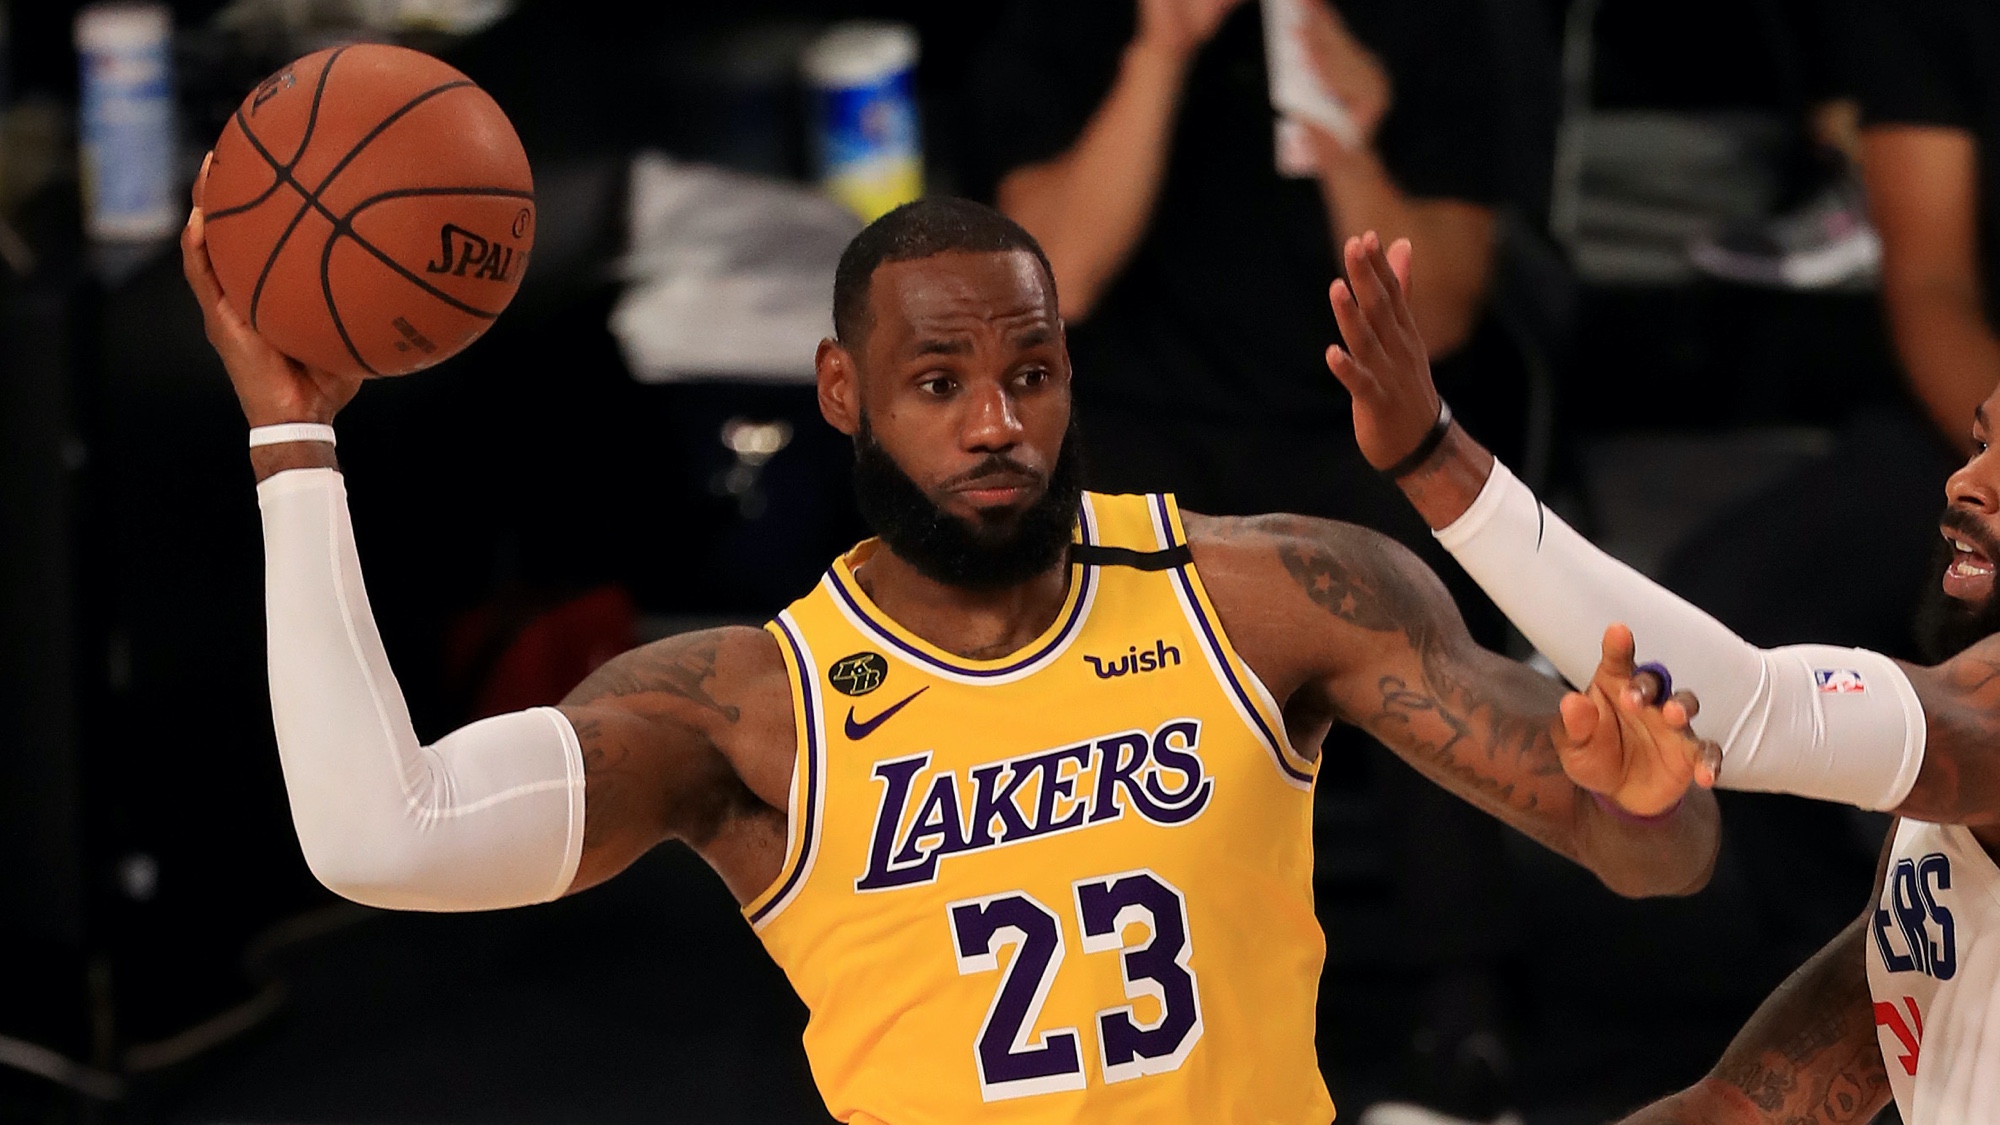 Lakers Vs Raptors Live Stream How To Watch The Nba Game Online Tom S Guide